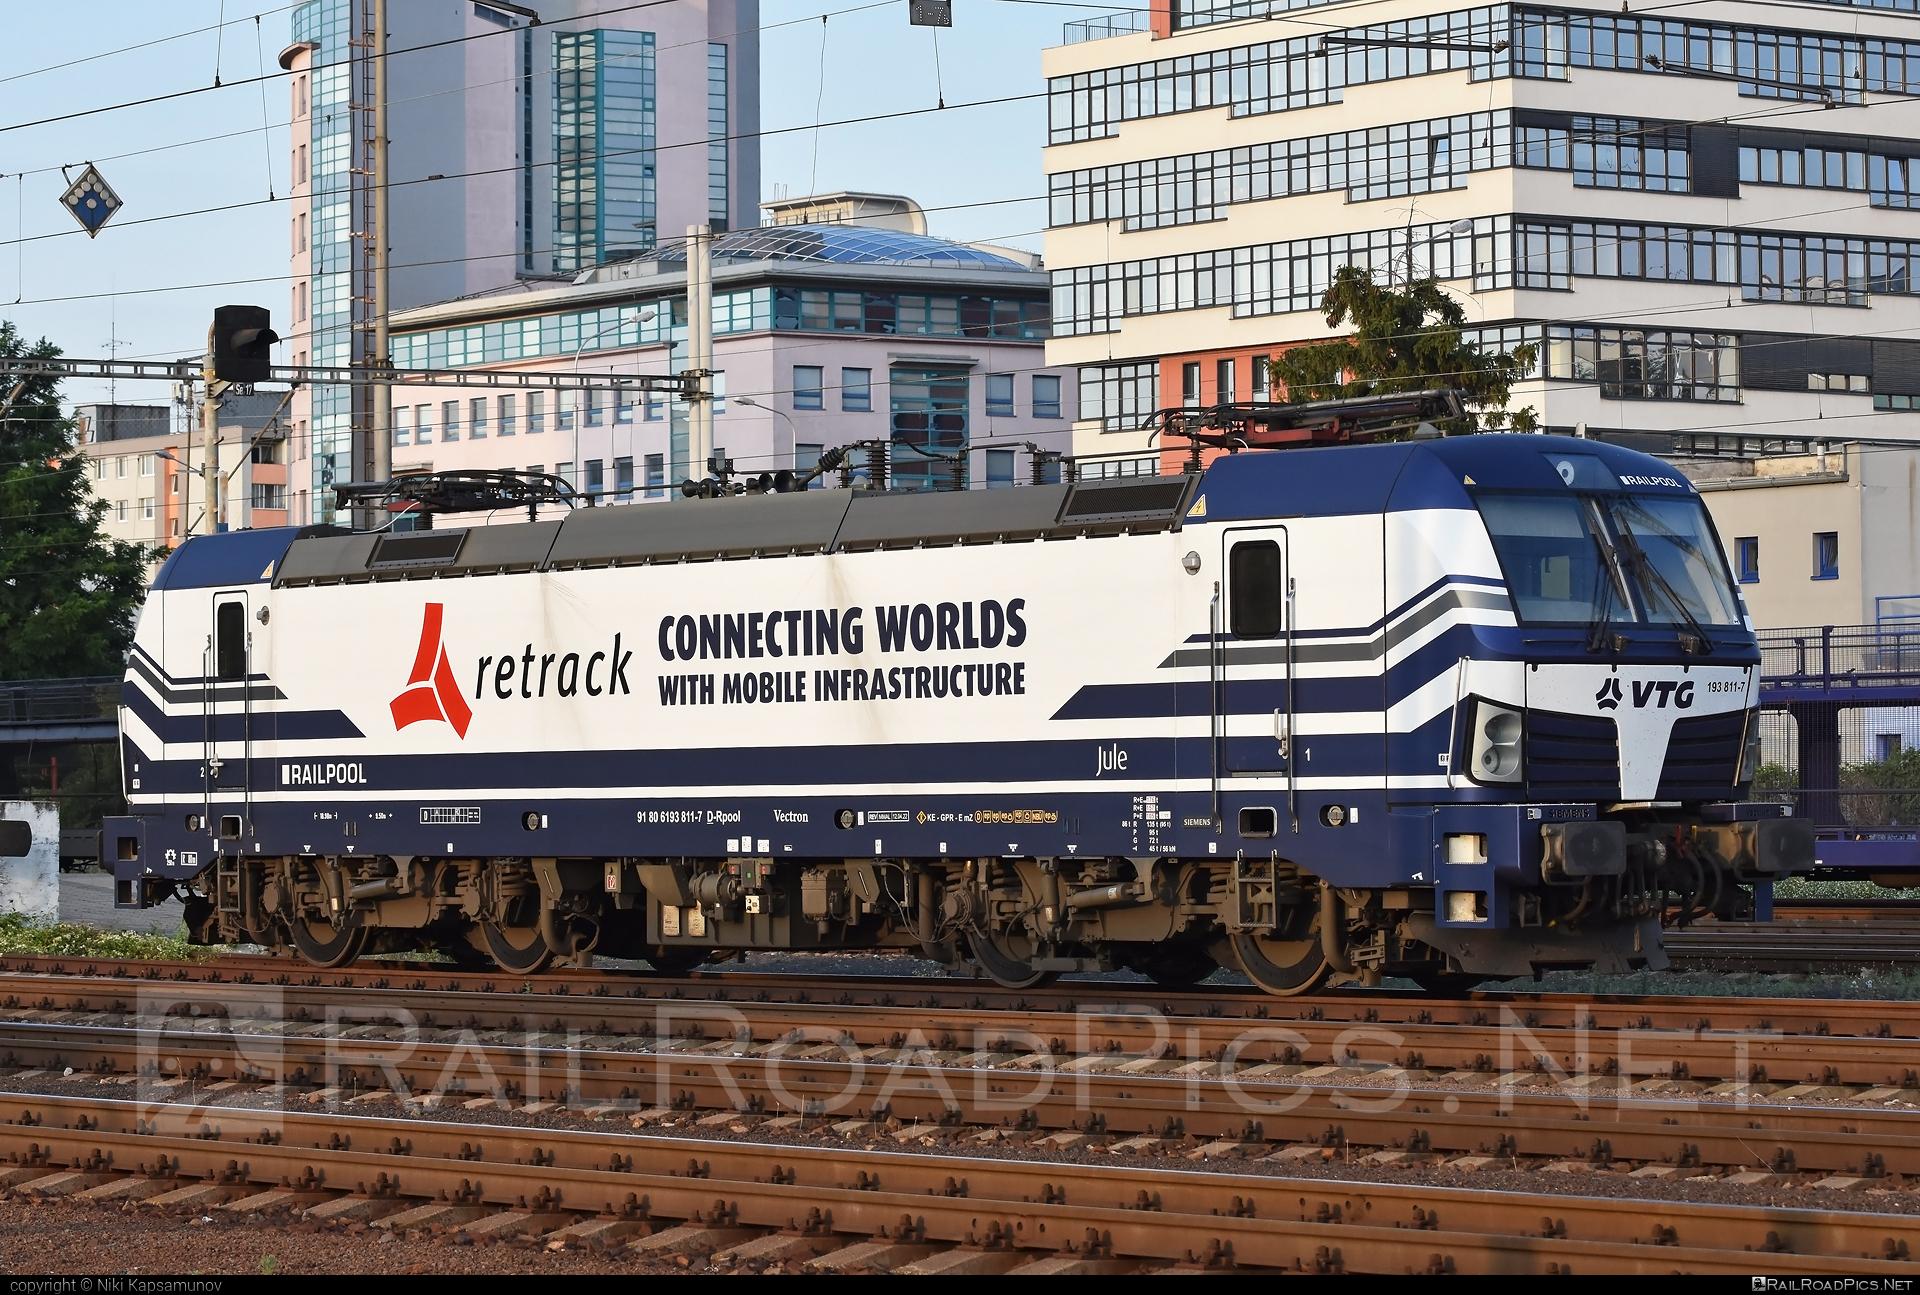 Siemens Vectron AC - 193 811-7 operated by Retrack GmbH & Co. KG #railpool #railpoolgmbh #retrack #retrackgmbh #siemens #siemensVectron #siemensVectronAC #vectron #vectronAC #vtg